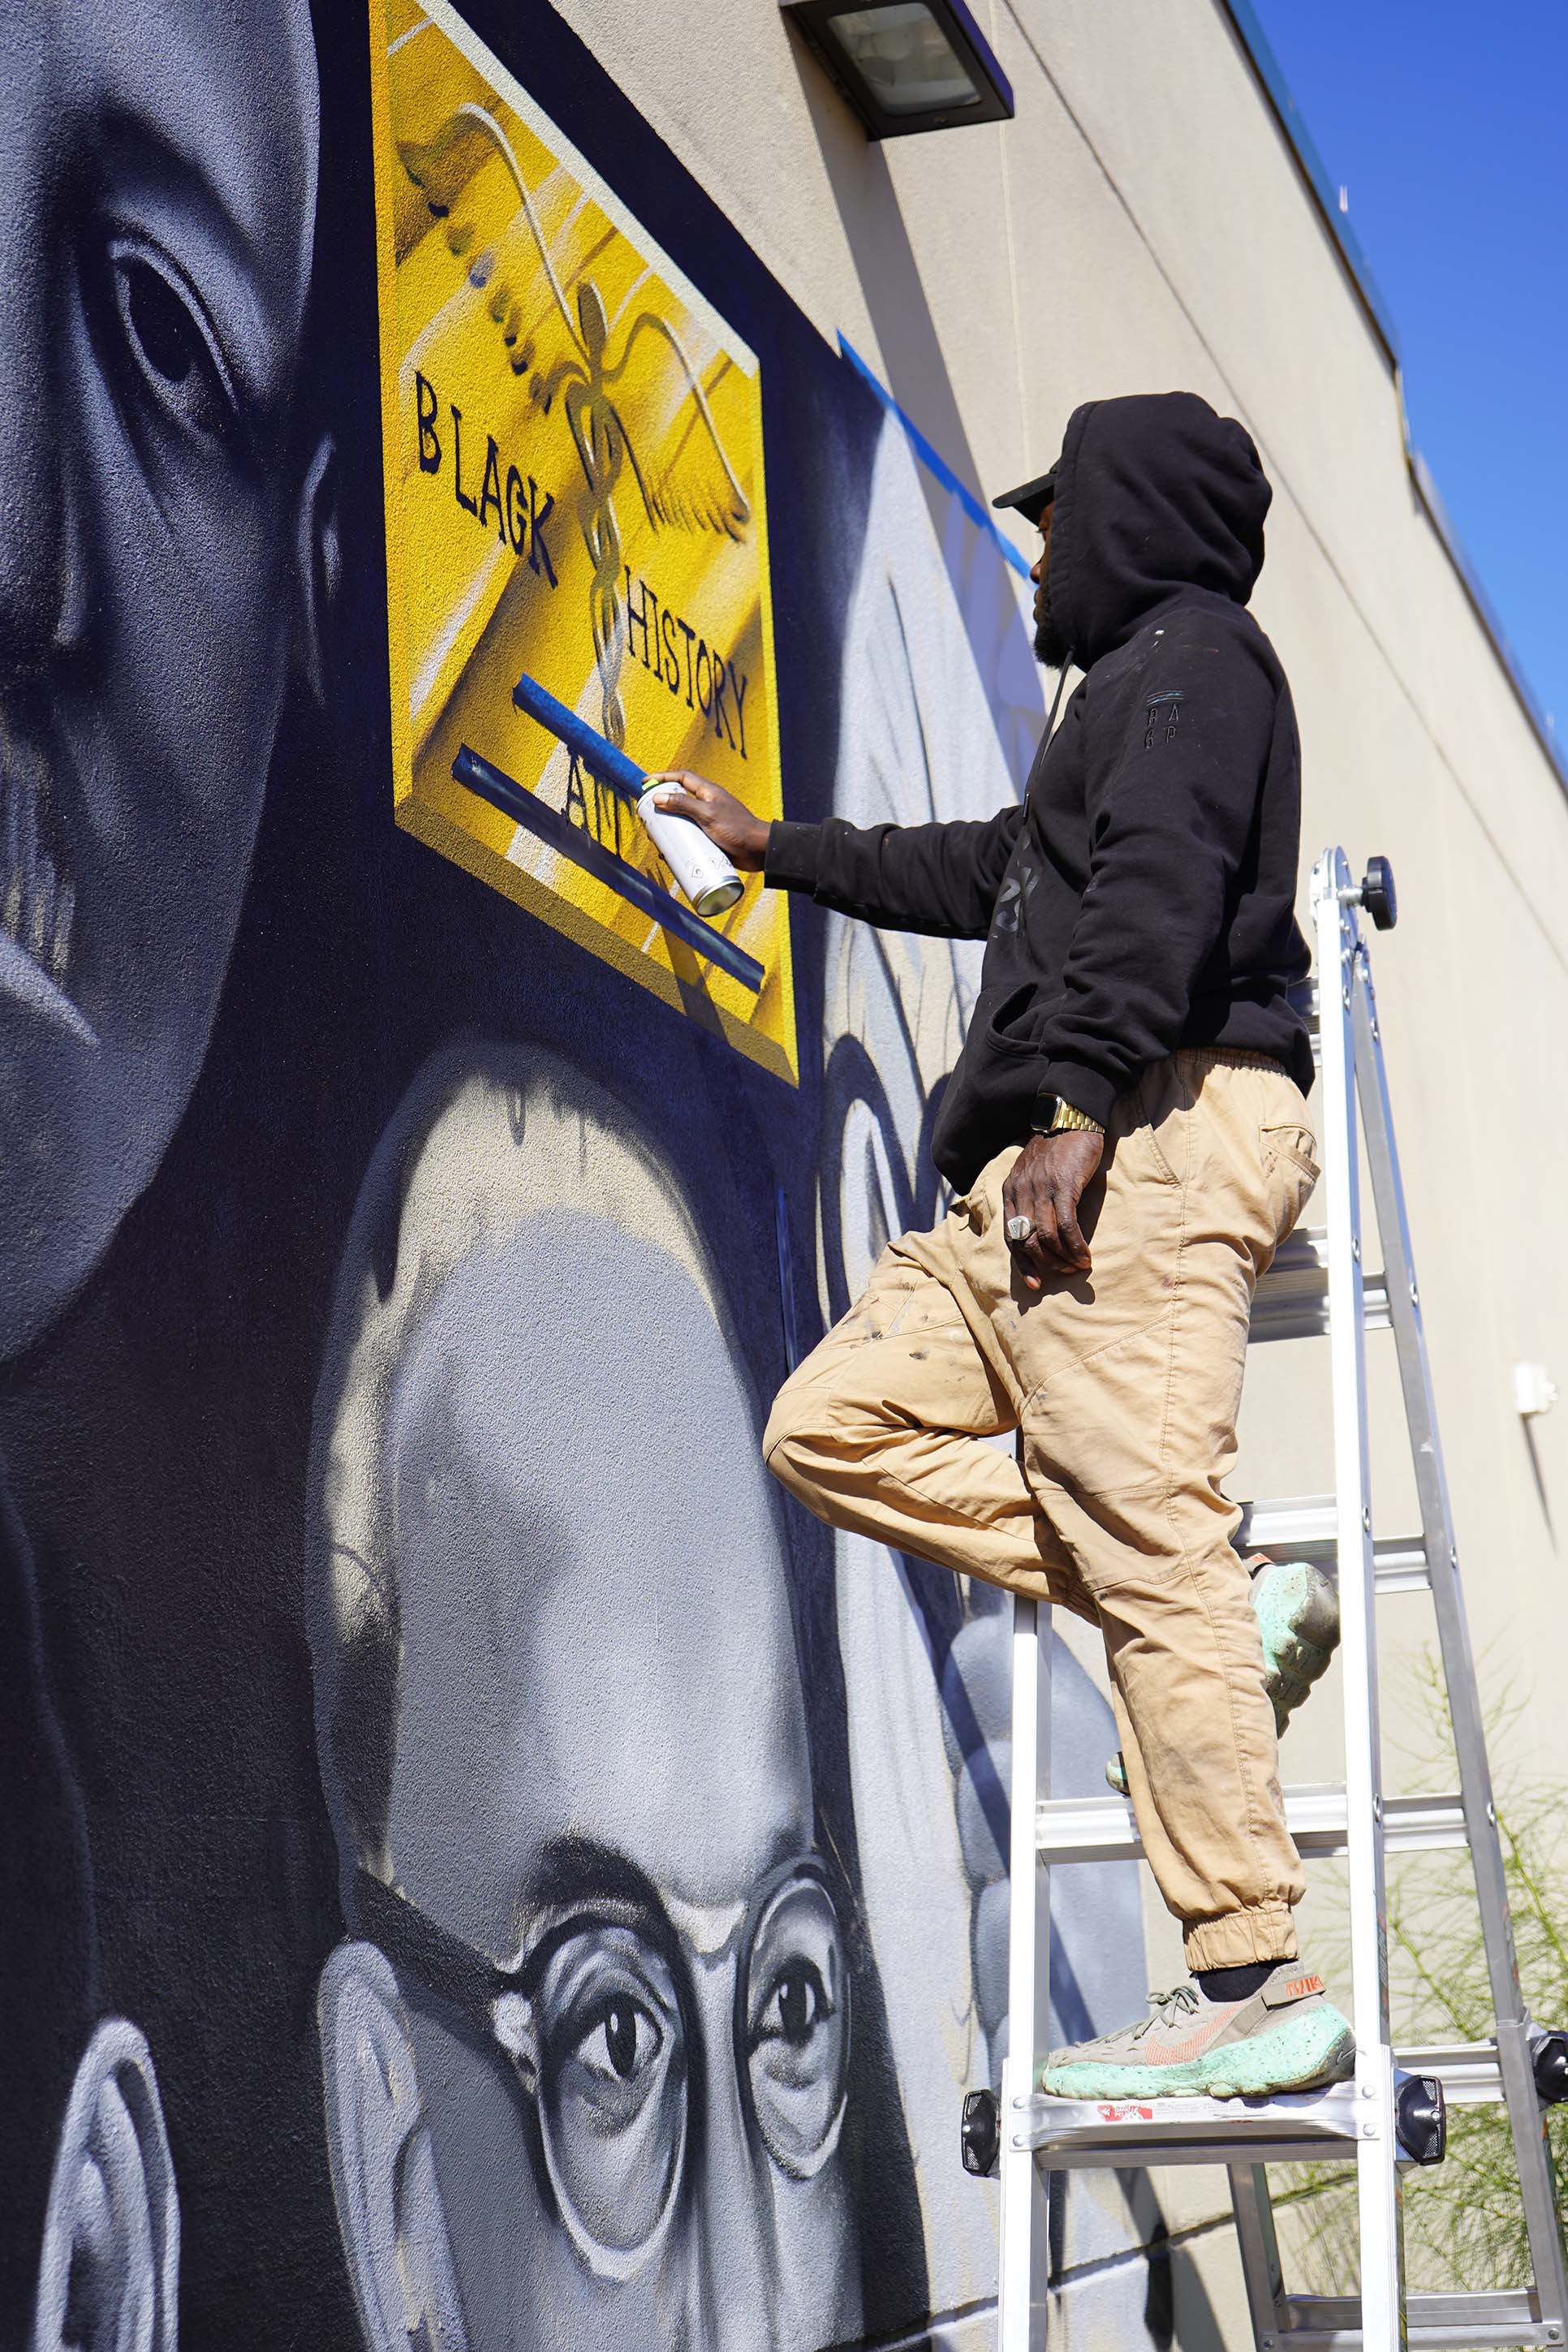 Local artist paints black icons, athletes, activist, musicians and more. The murals are a part of an ongoing project by The Shining Light Foundation. Several new murals will be created during Black History Month 2022.